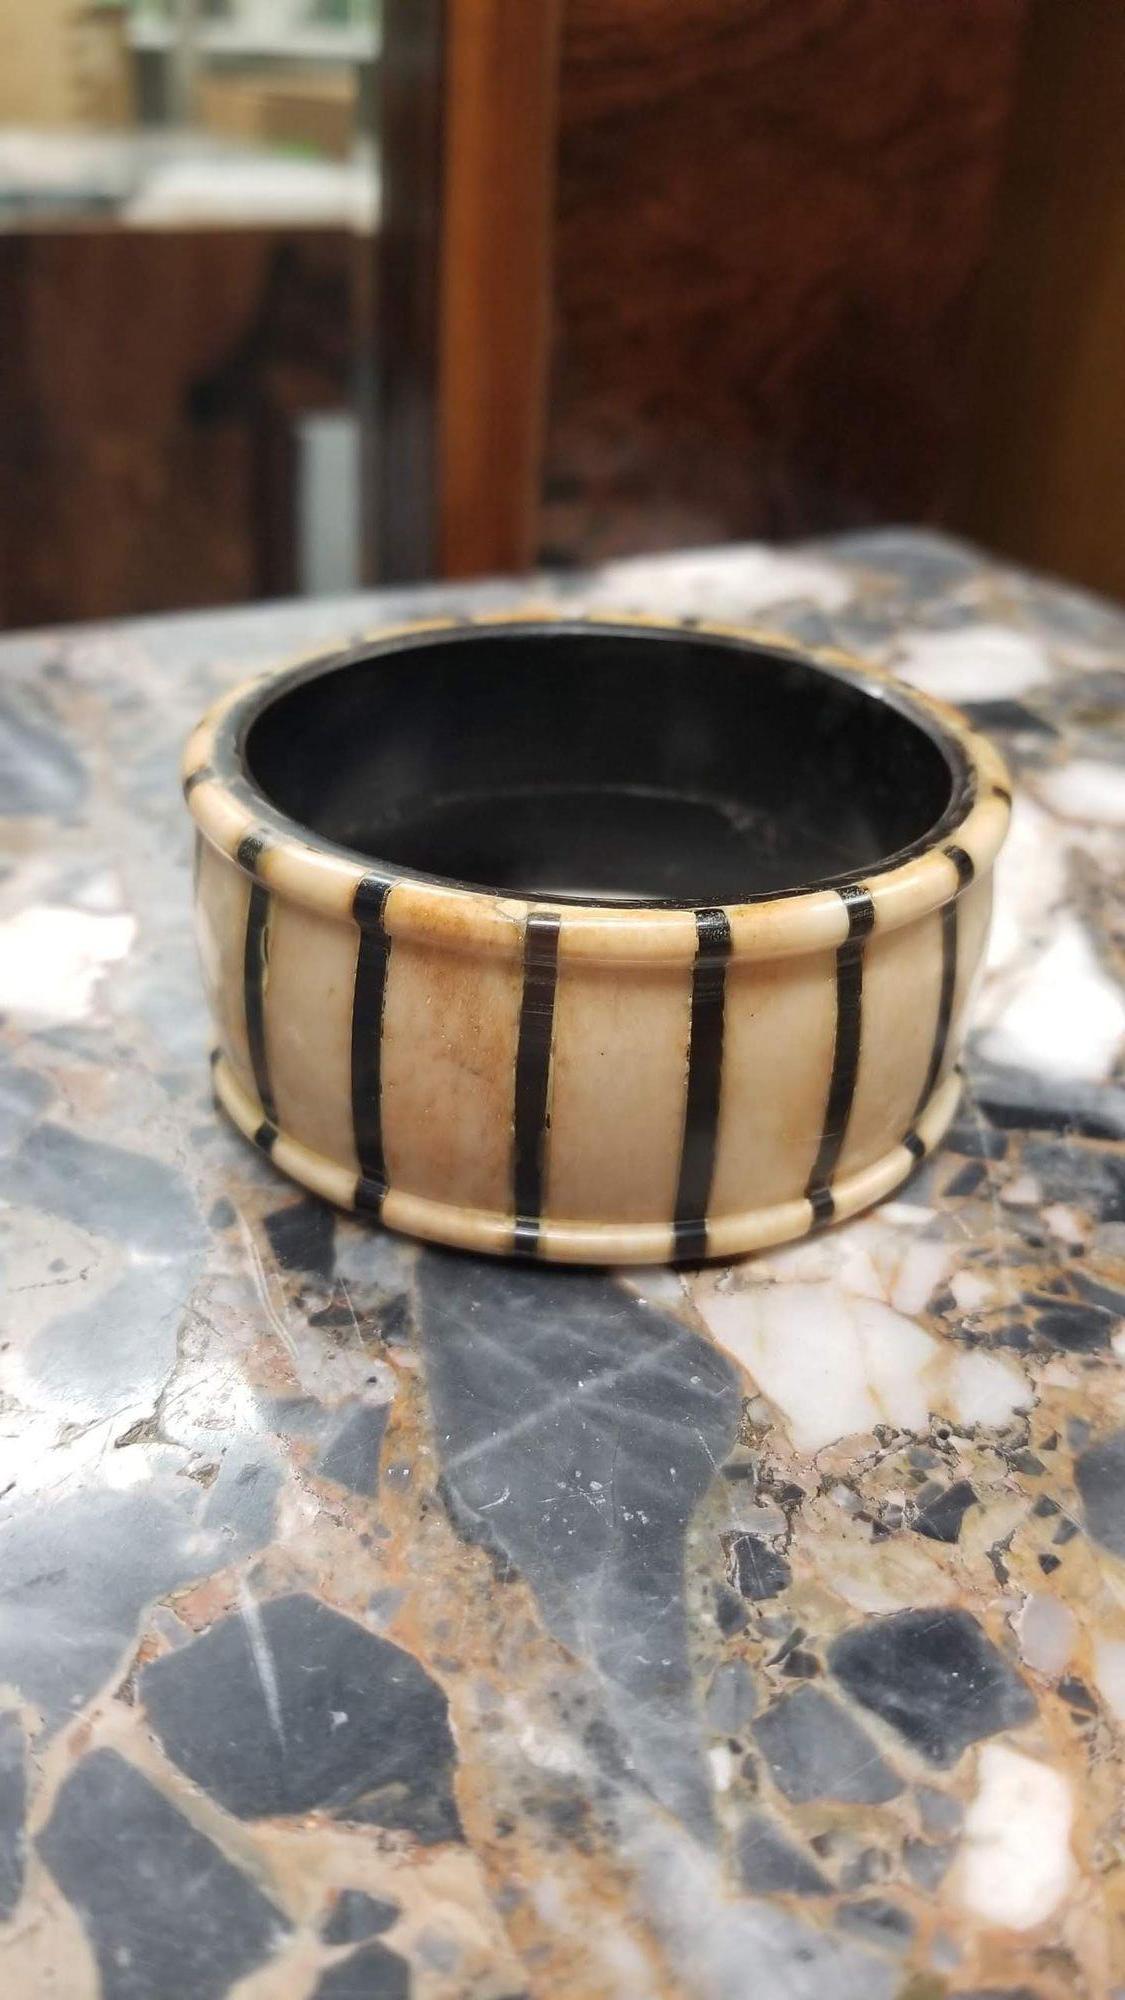 A vintage horn-look bangle adorned with intricately inlaid black vertical stripes. The colors shift subtly, displaying a range of natural variations with each angle. The interior of the bangle gives the impression of being crafted from sleek black